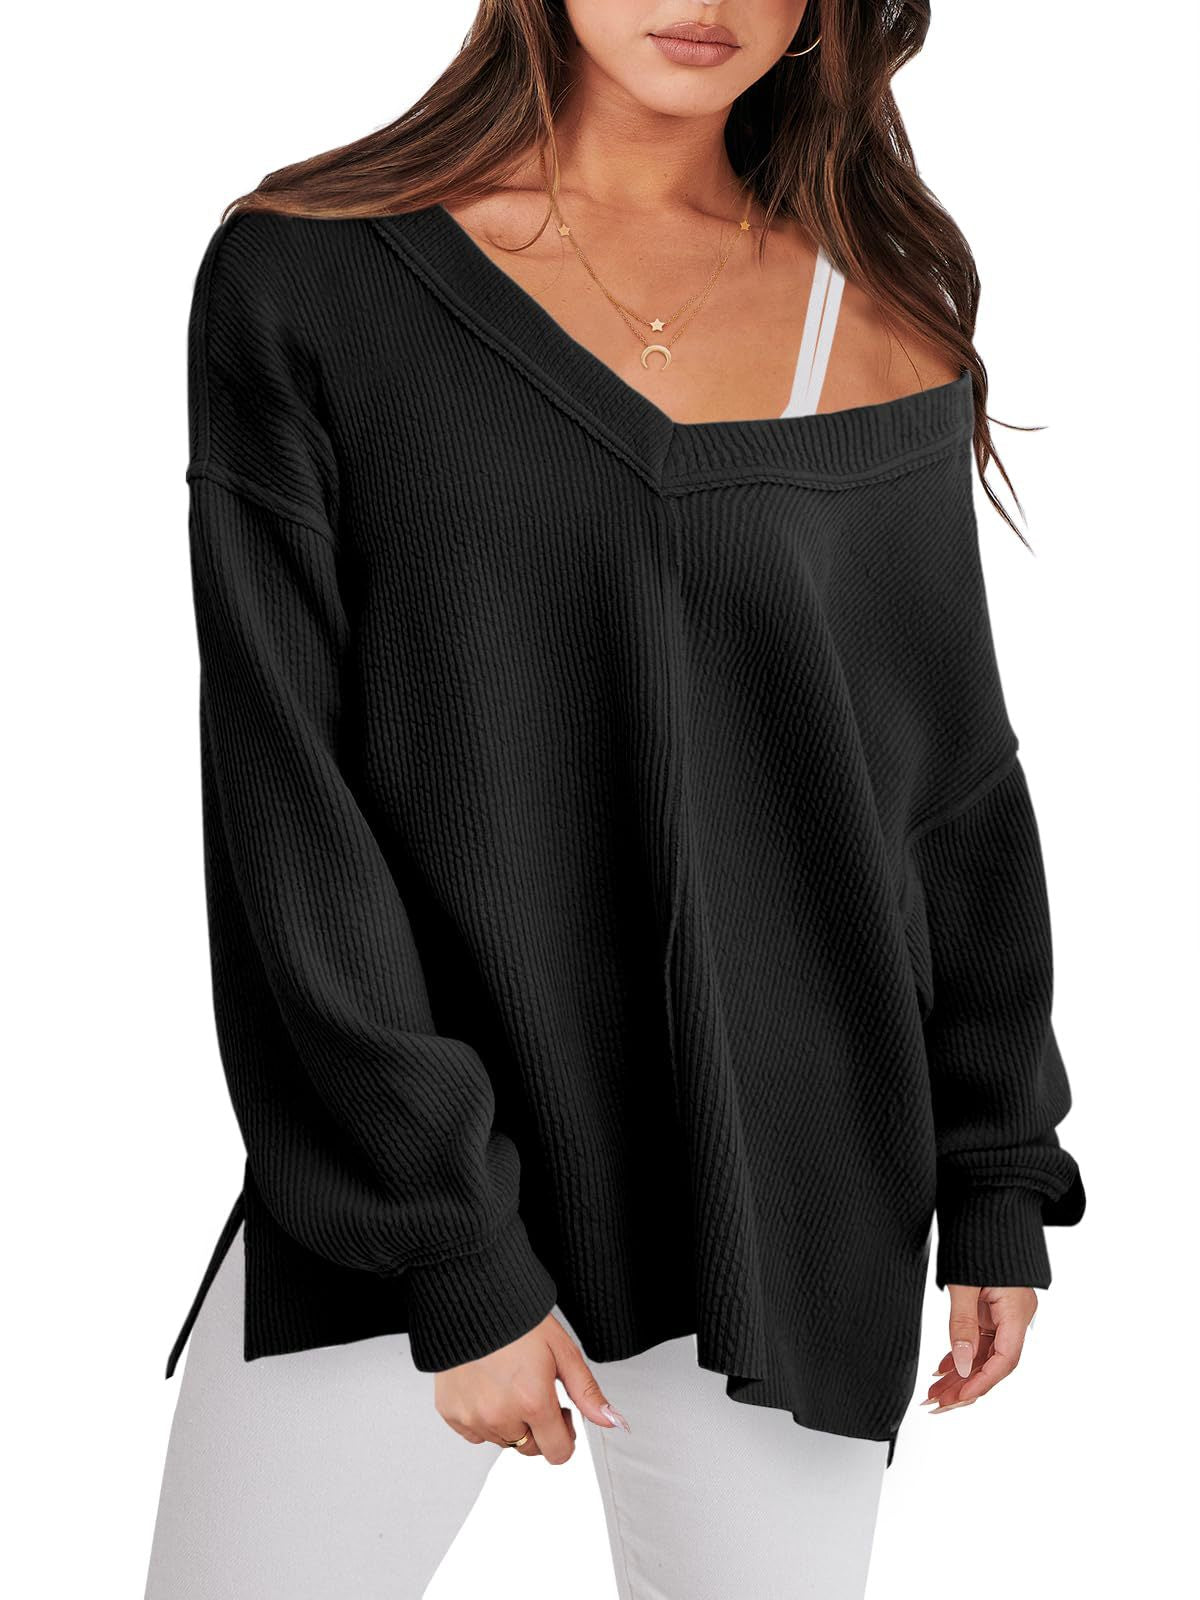 Fashion Lightweight V-neck Sweaters Women Casual Long Sleeve Ribbed Knit Side Slit Pullover Top